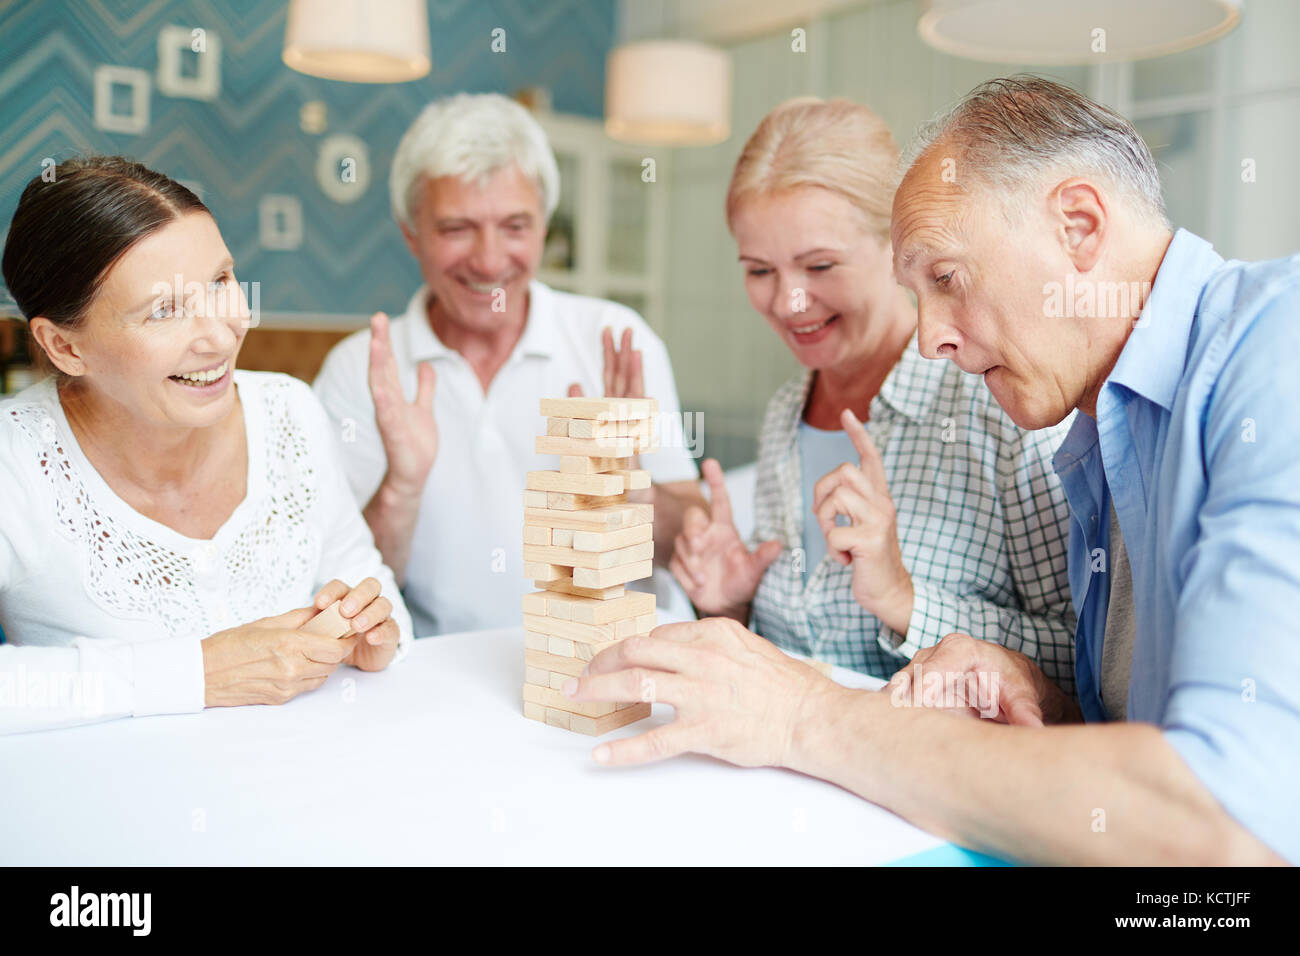 Playing Board Game With Friends Stock Photo Alamy